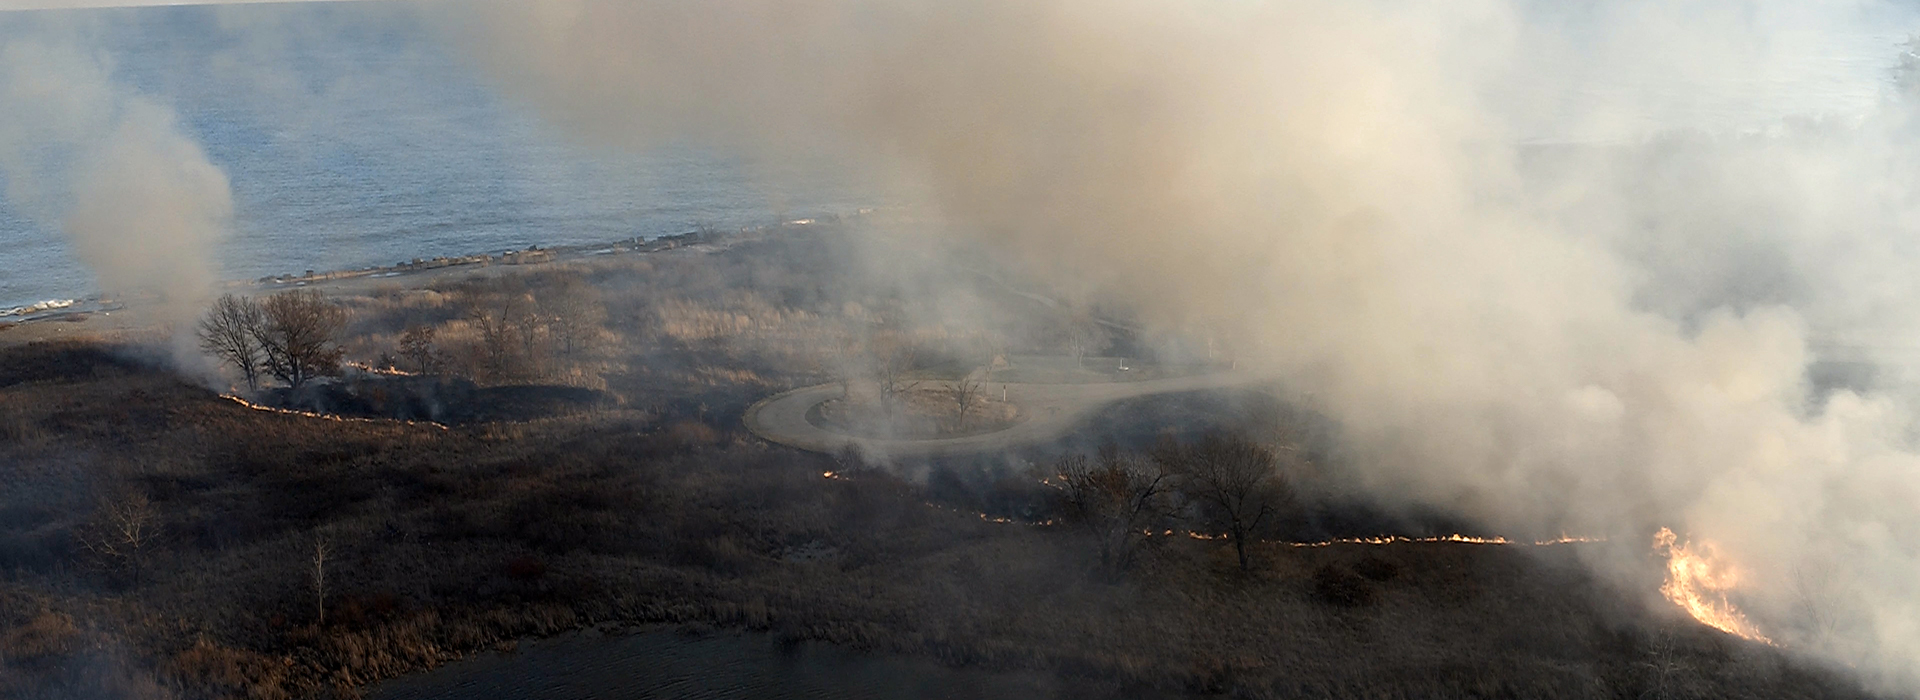 Drone Arrival at controlled burn at Illinois state park